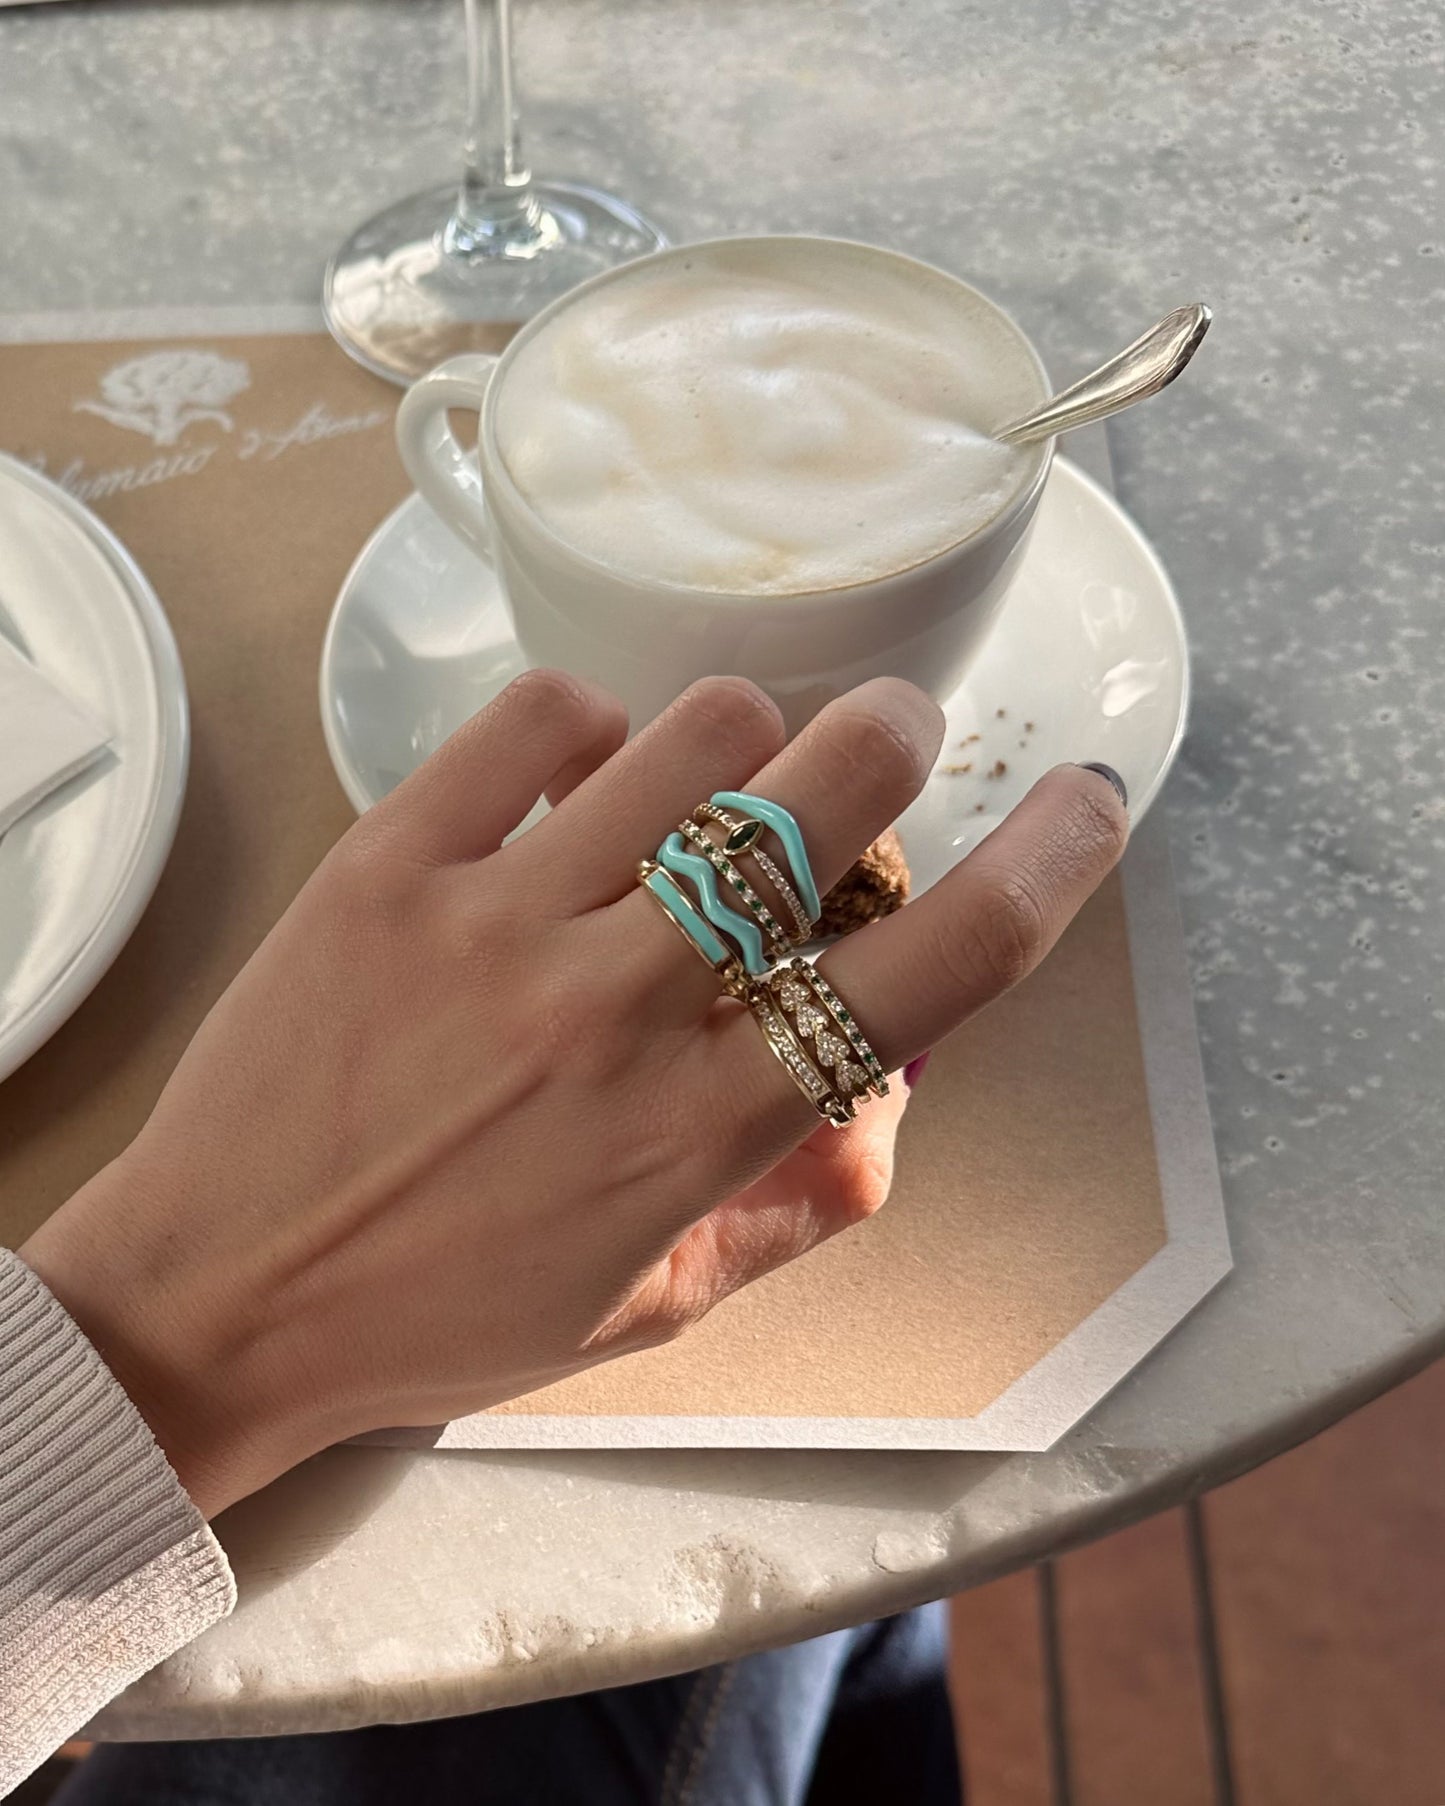 Turquoise V Ring - Gold Plated